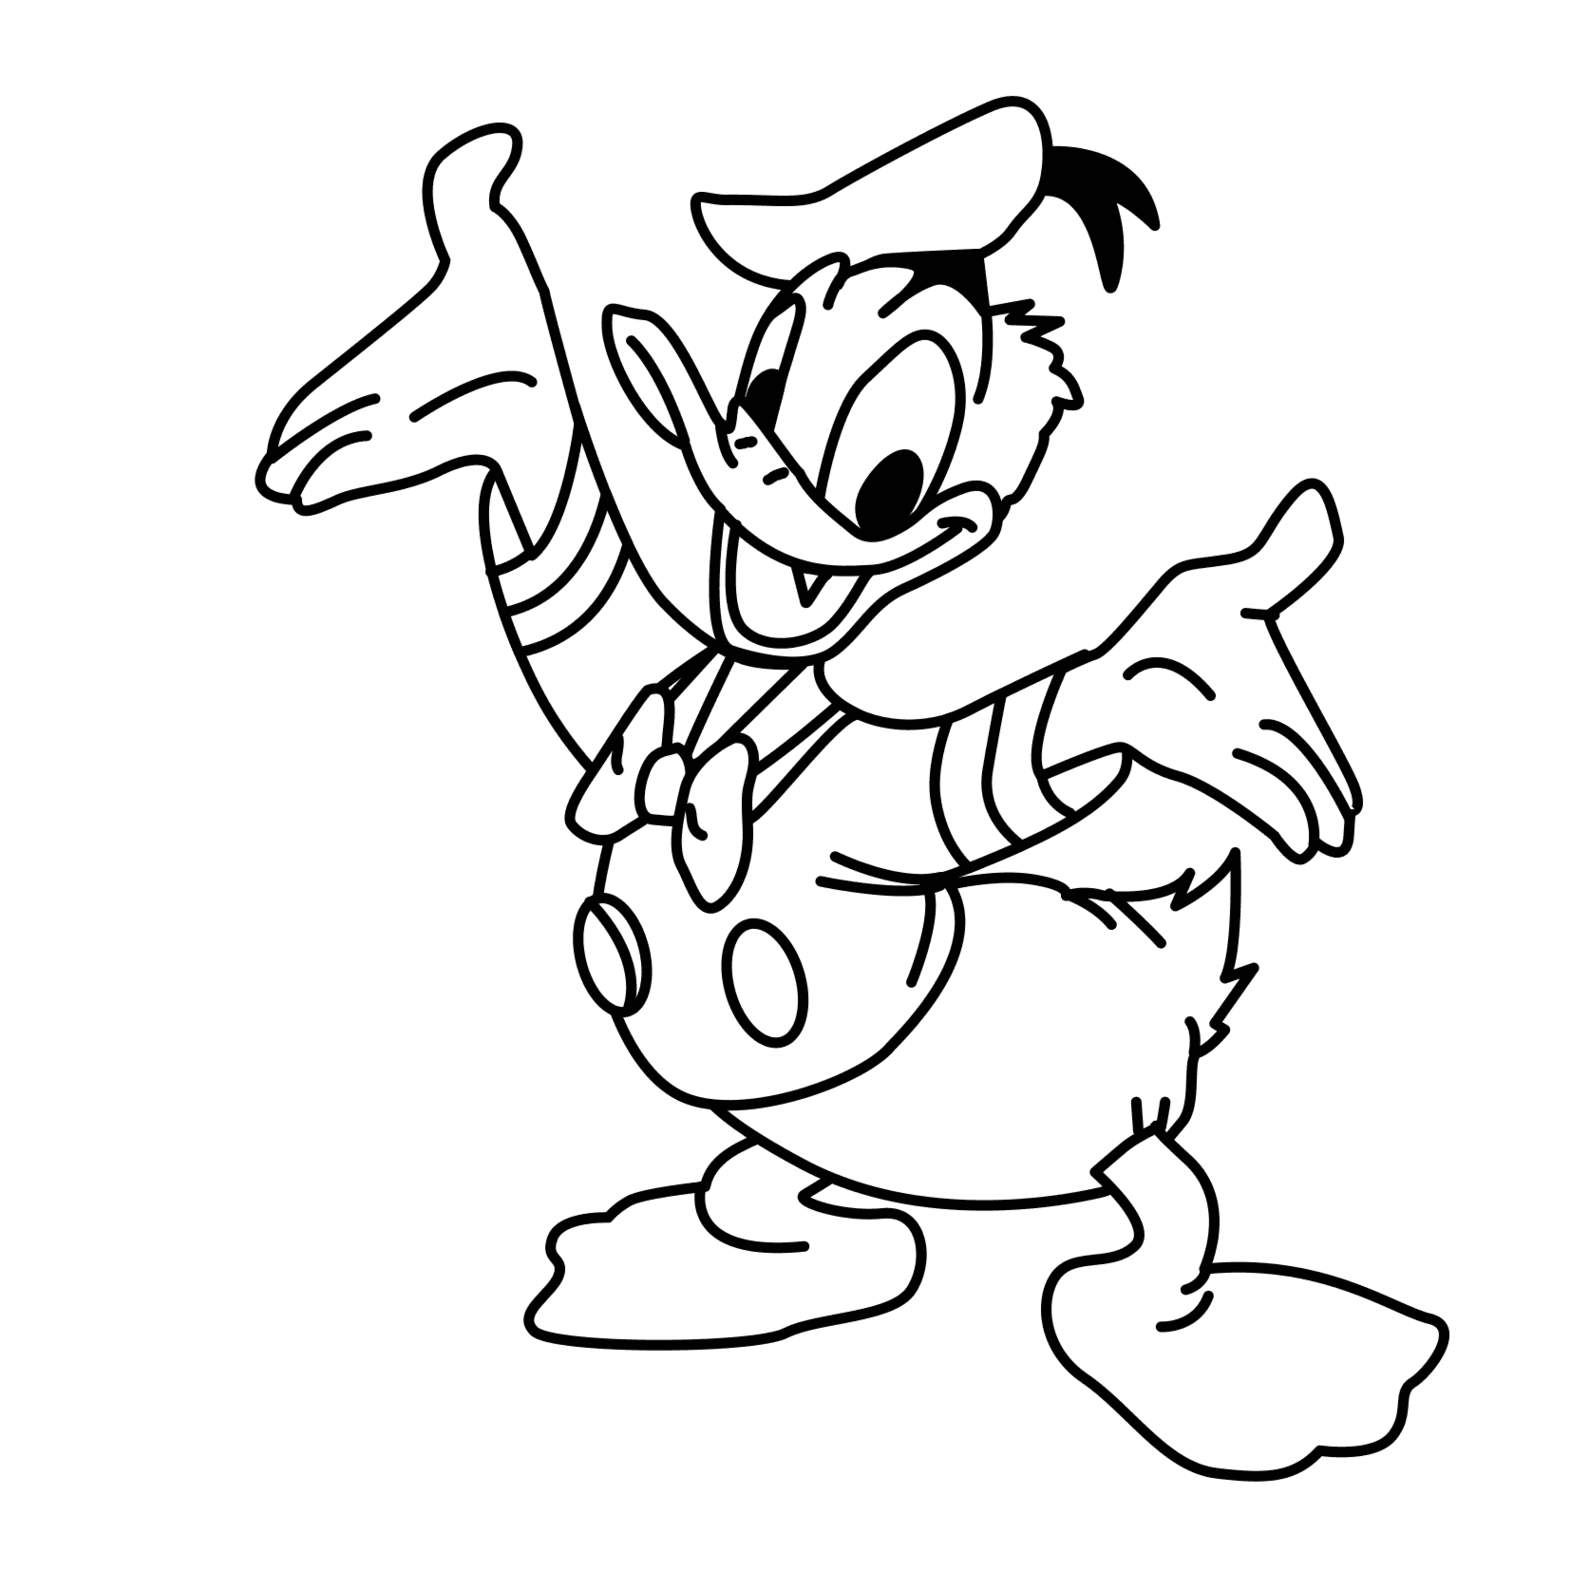 Drawings To Paint & Colour Donald Duck - Print Design 021